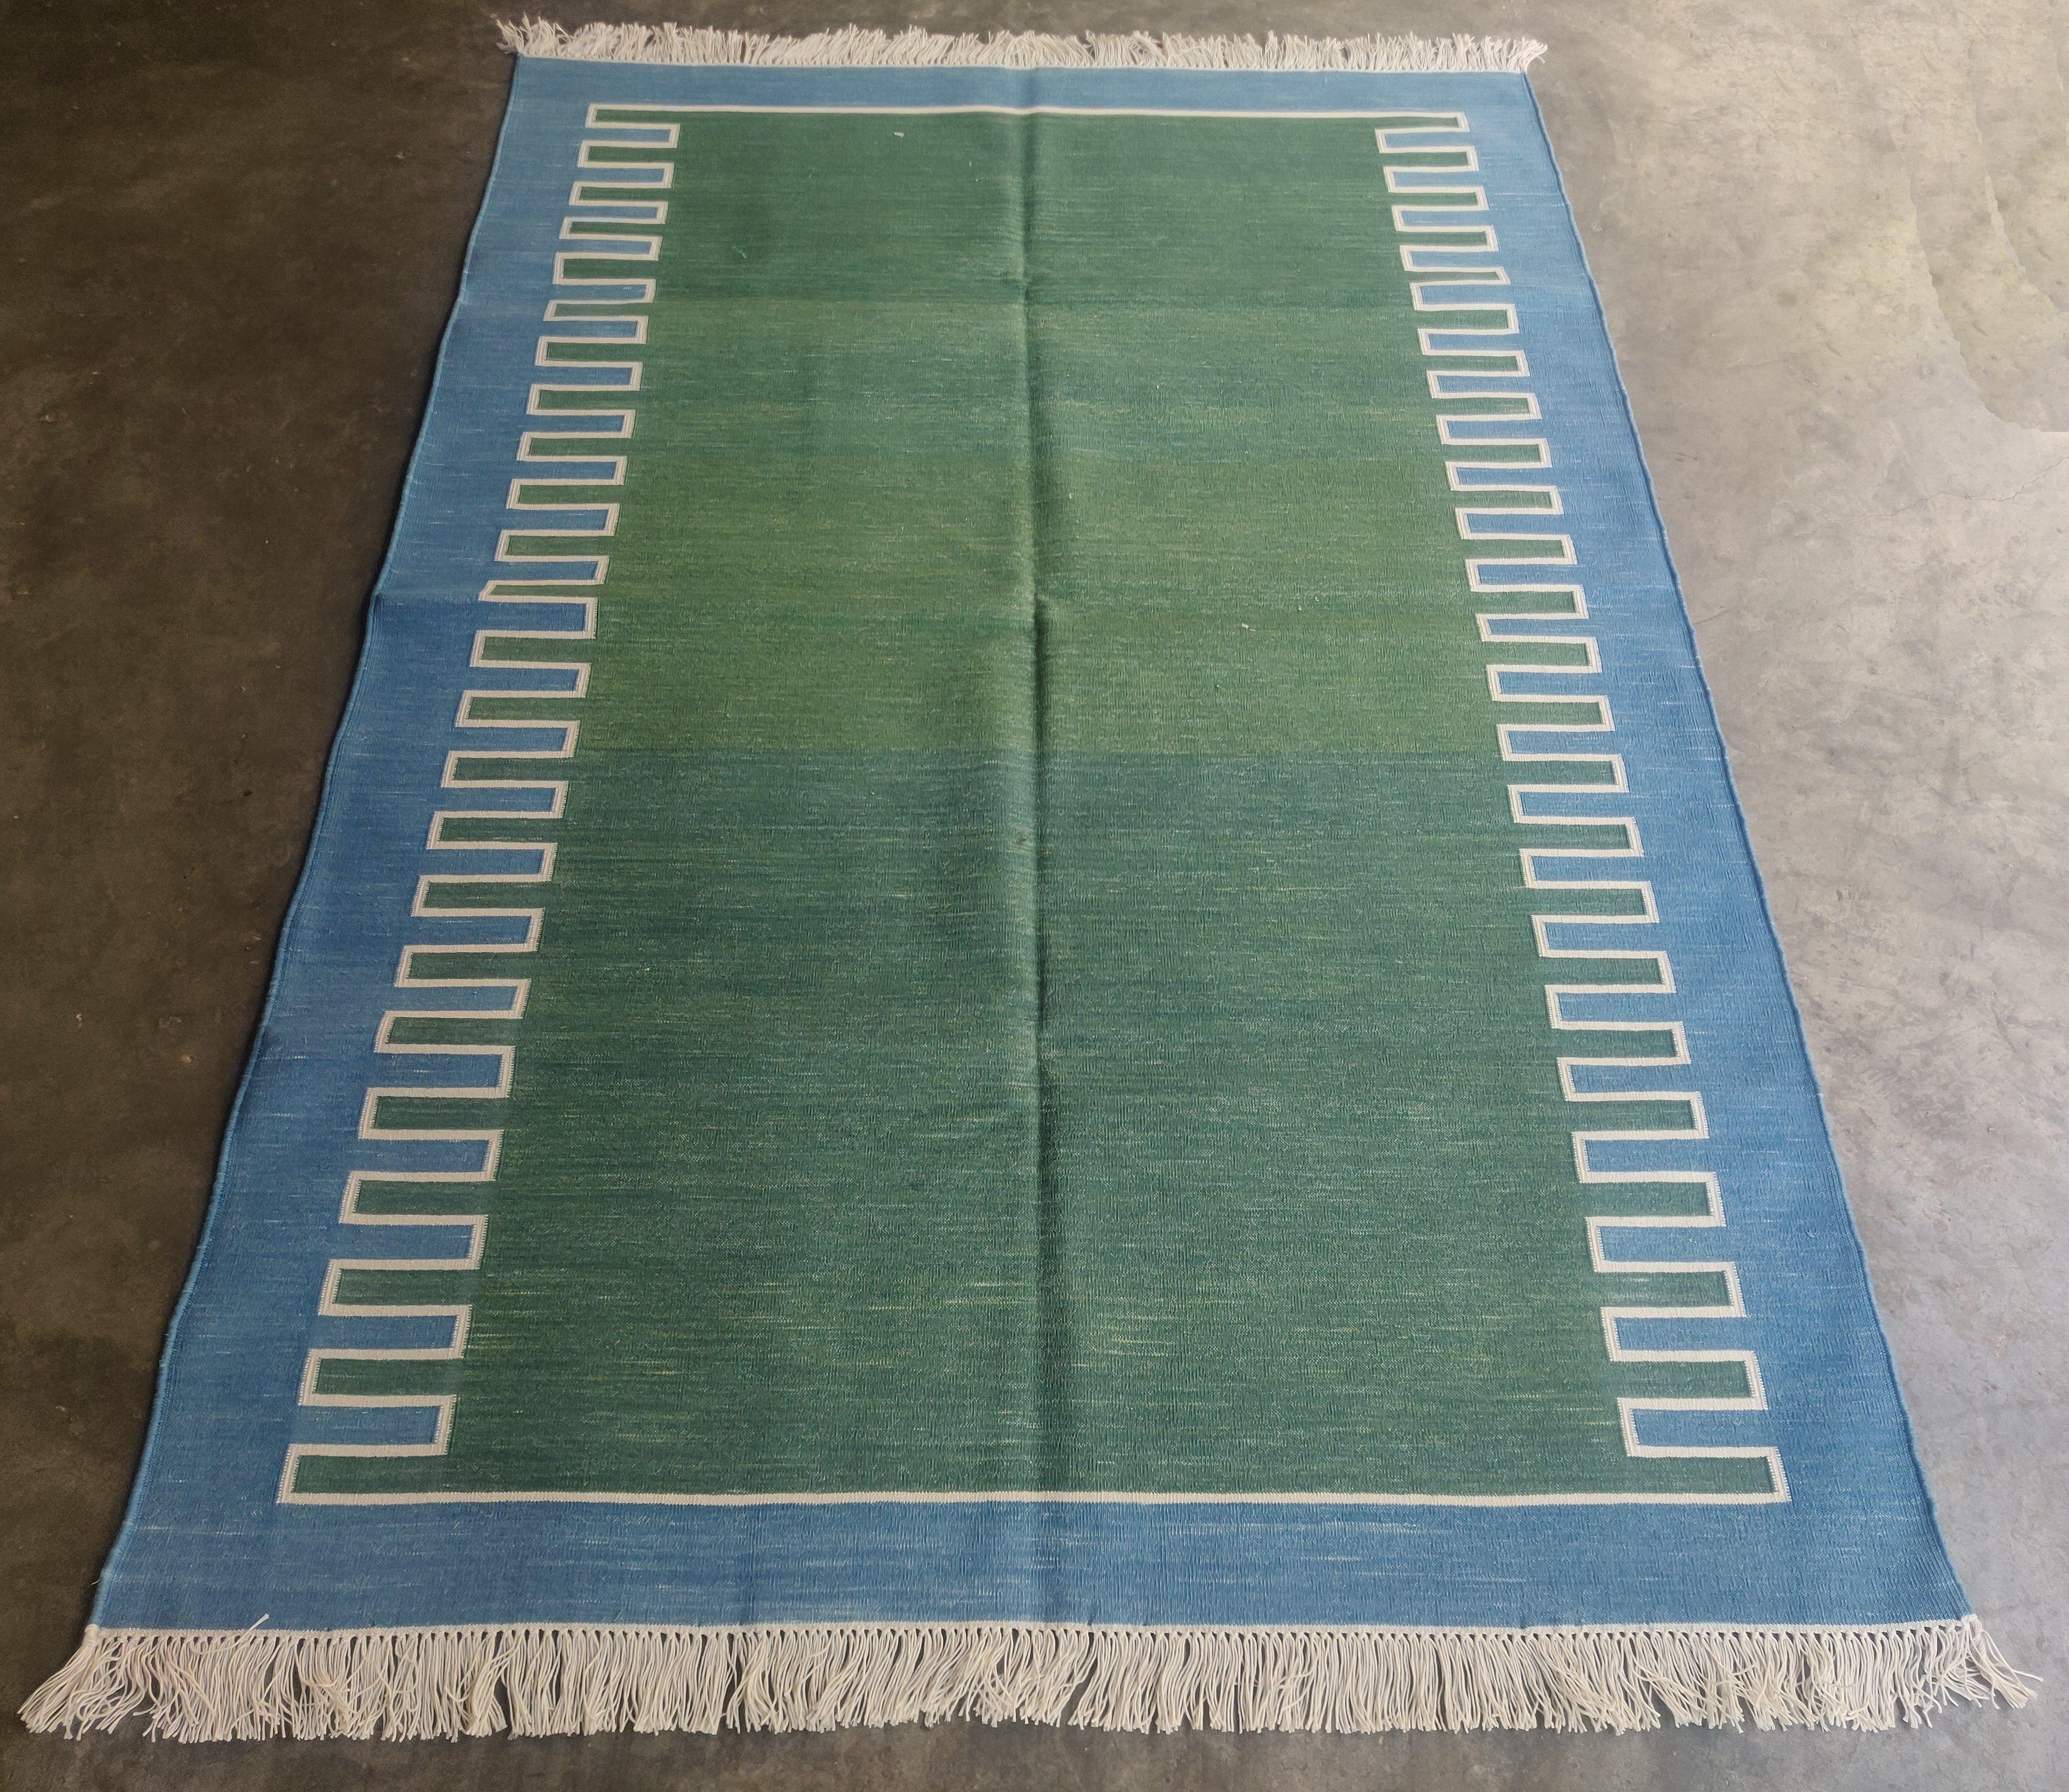 Indian Handmade Cotton Area Flat Weave Rug, 4x6 Green And Blue Zig Zag Striped Dhurrie For Sale